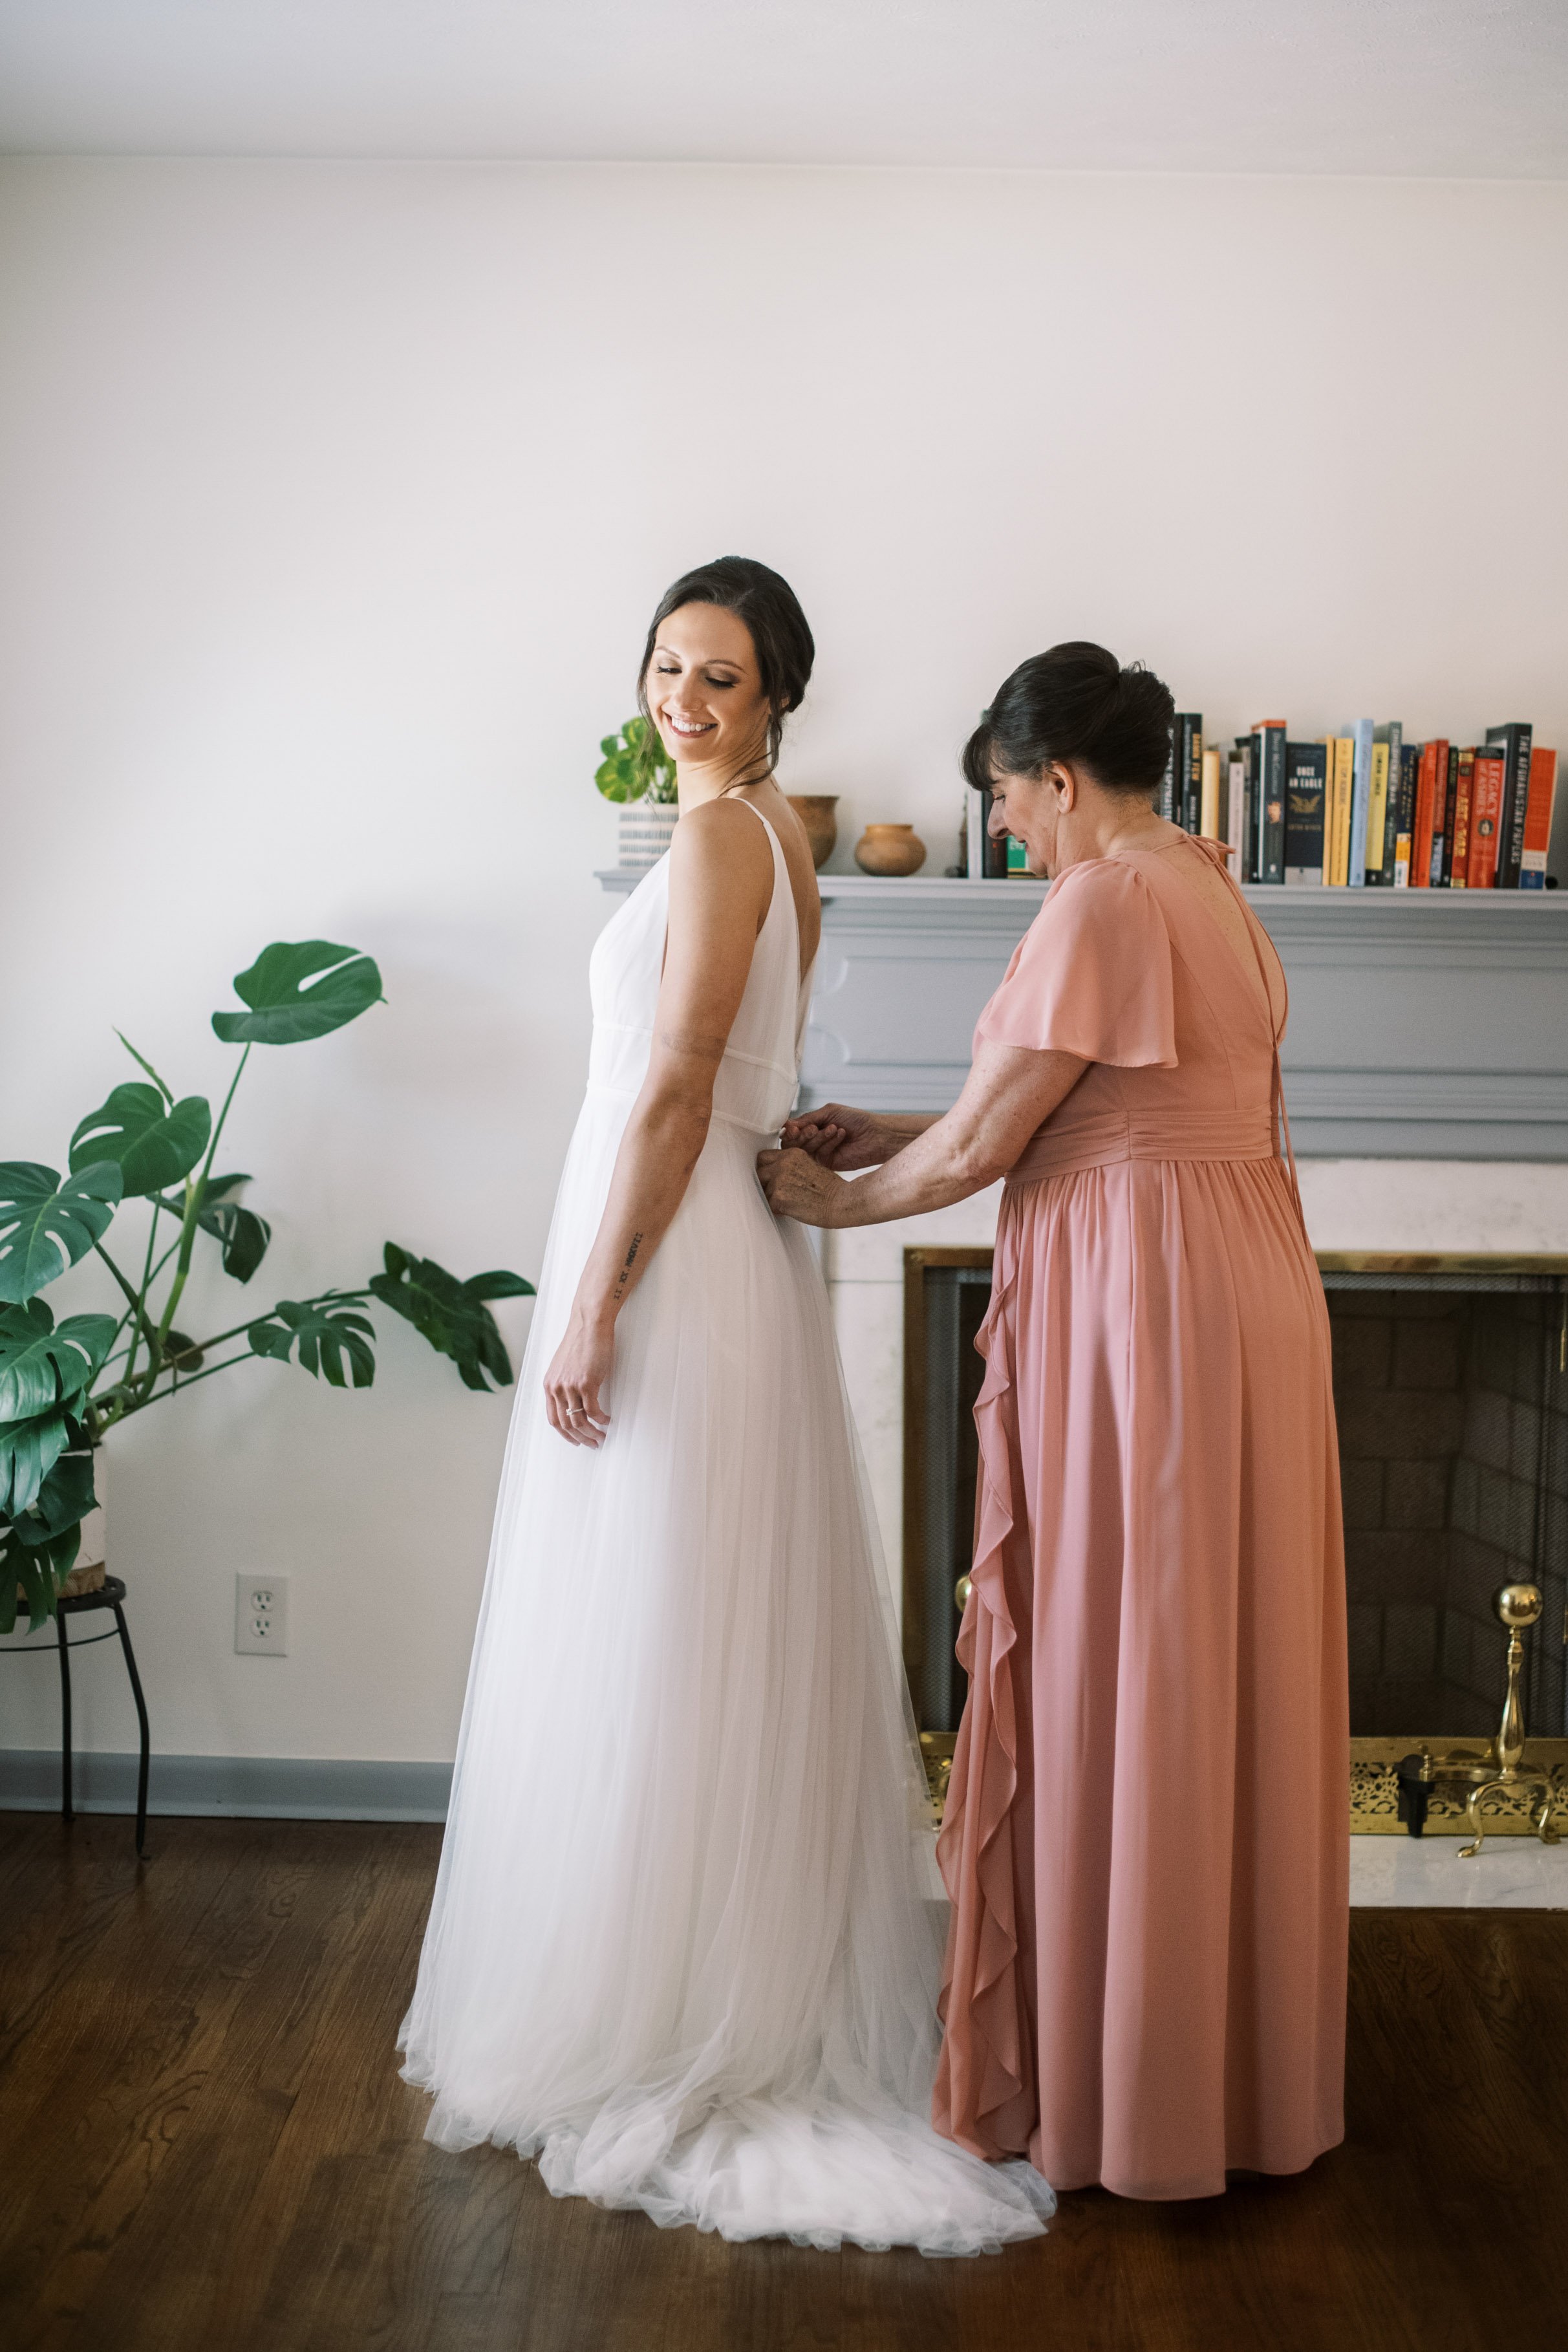 Mother Helps Bride Get Dressed Cape Fear Botanical Garden Wedding Fancy This Photography